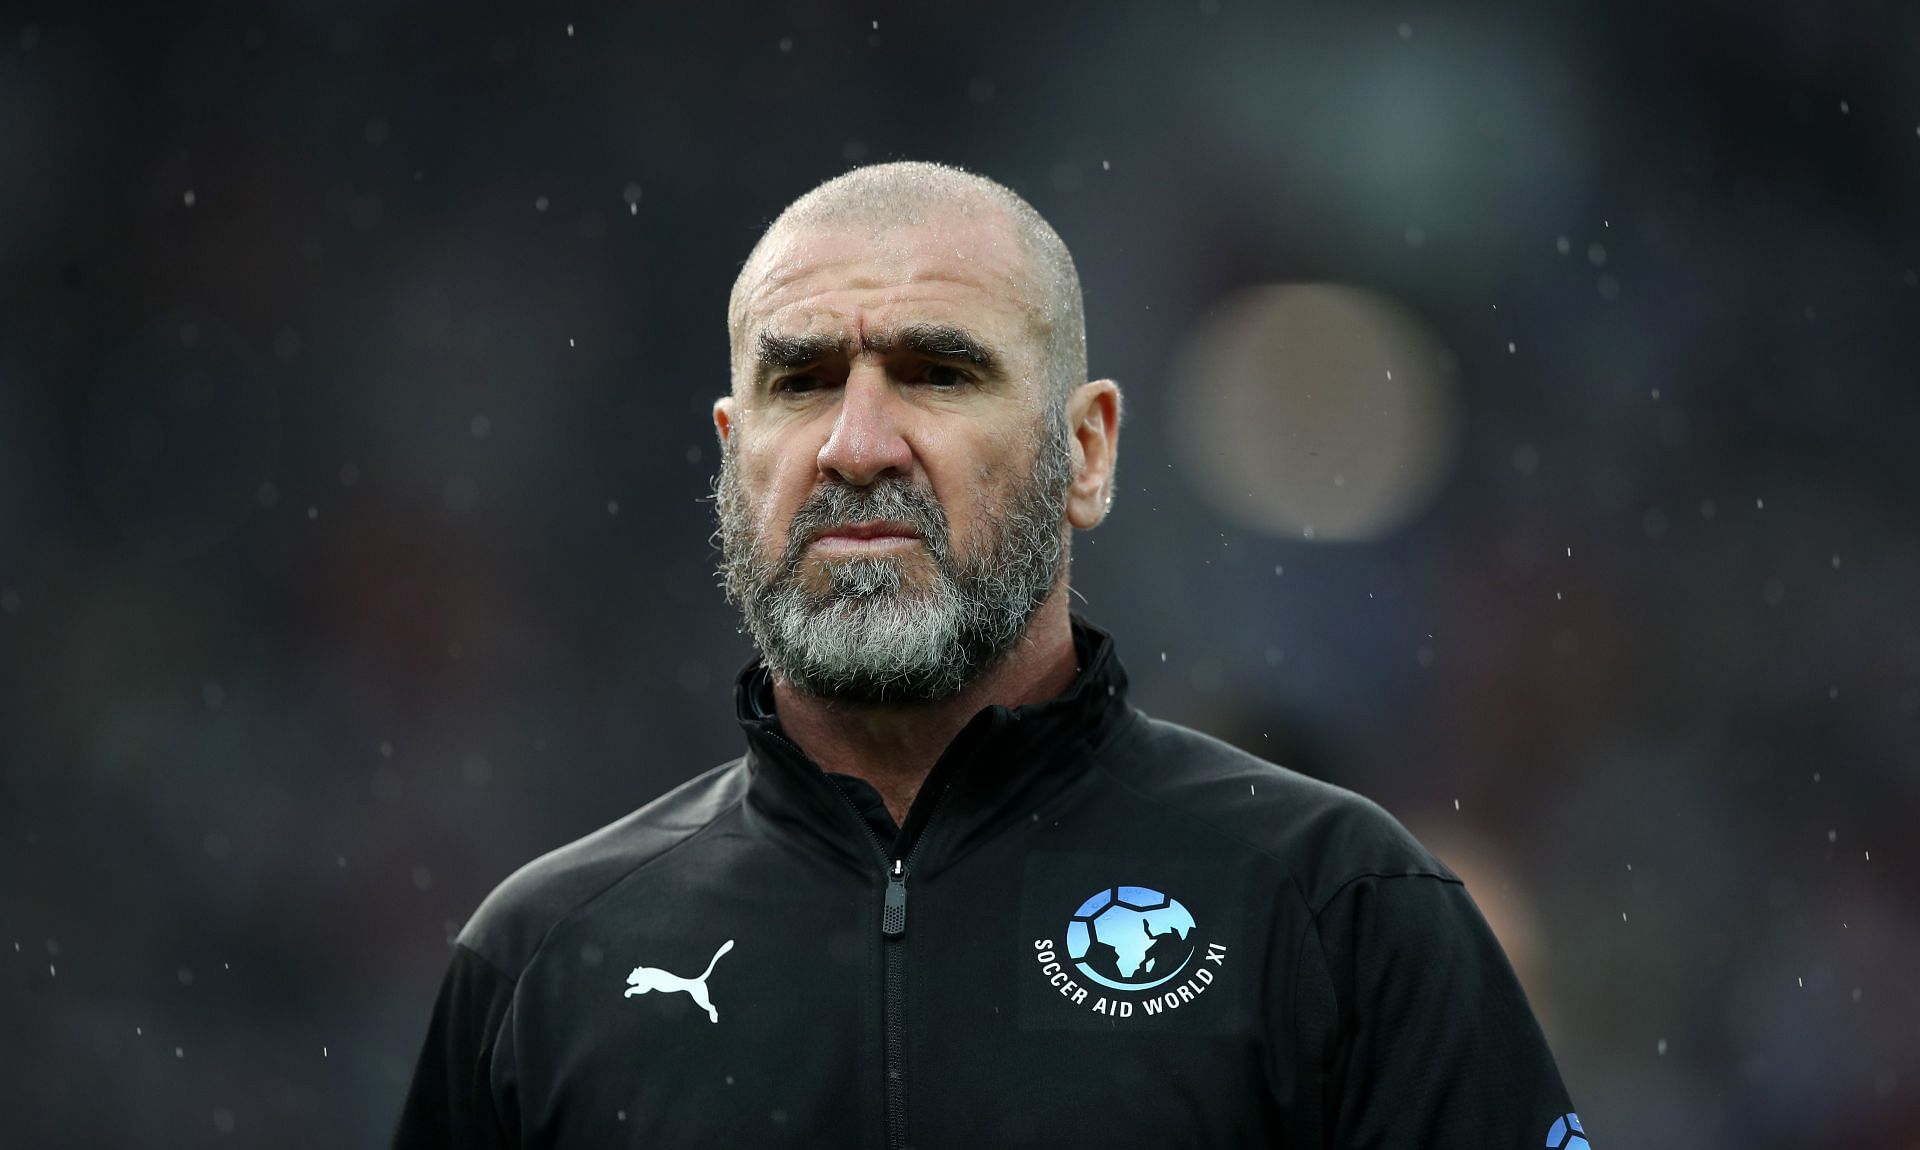 French former player Eric Cantona looks on during the Soccer Aid for UNICEF 2018 match between England and The Rest of the World at Old Trafford on June 10, 2018 in Manchester, England.